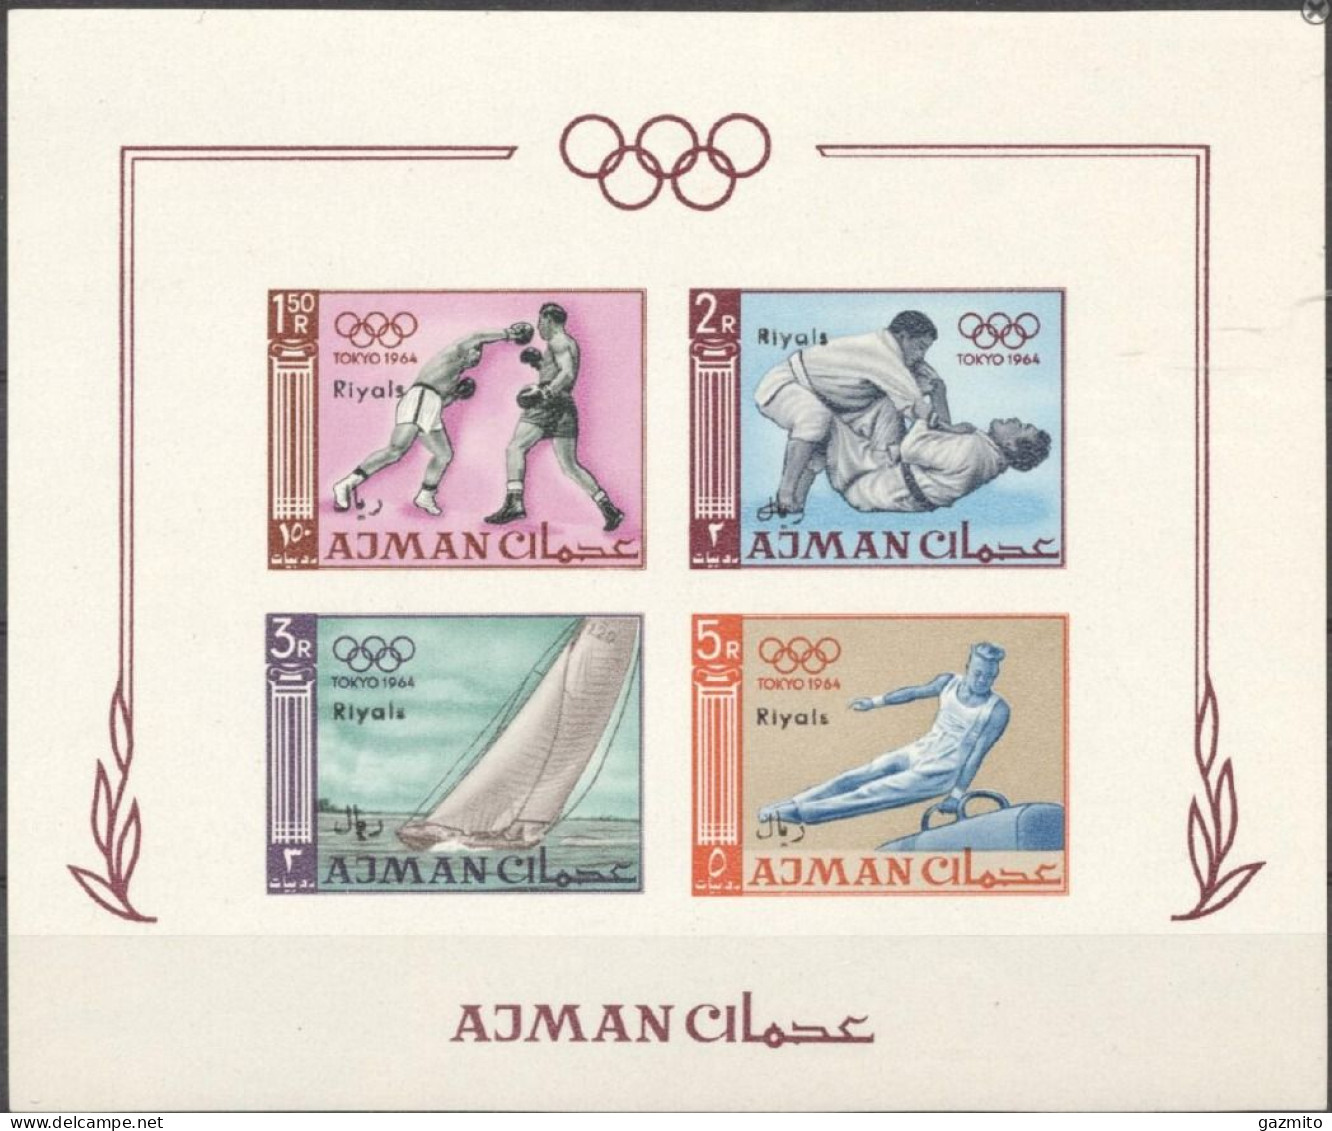 Ajman 1967, Olympic Games In Tokio, Judo, Boxing, Shipping, Gymnastic, 4val In BF IMPERFORATED - Pugilato